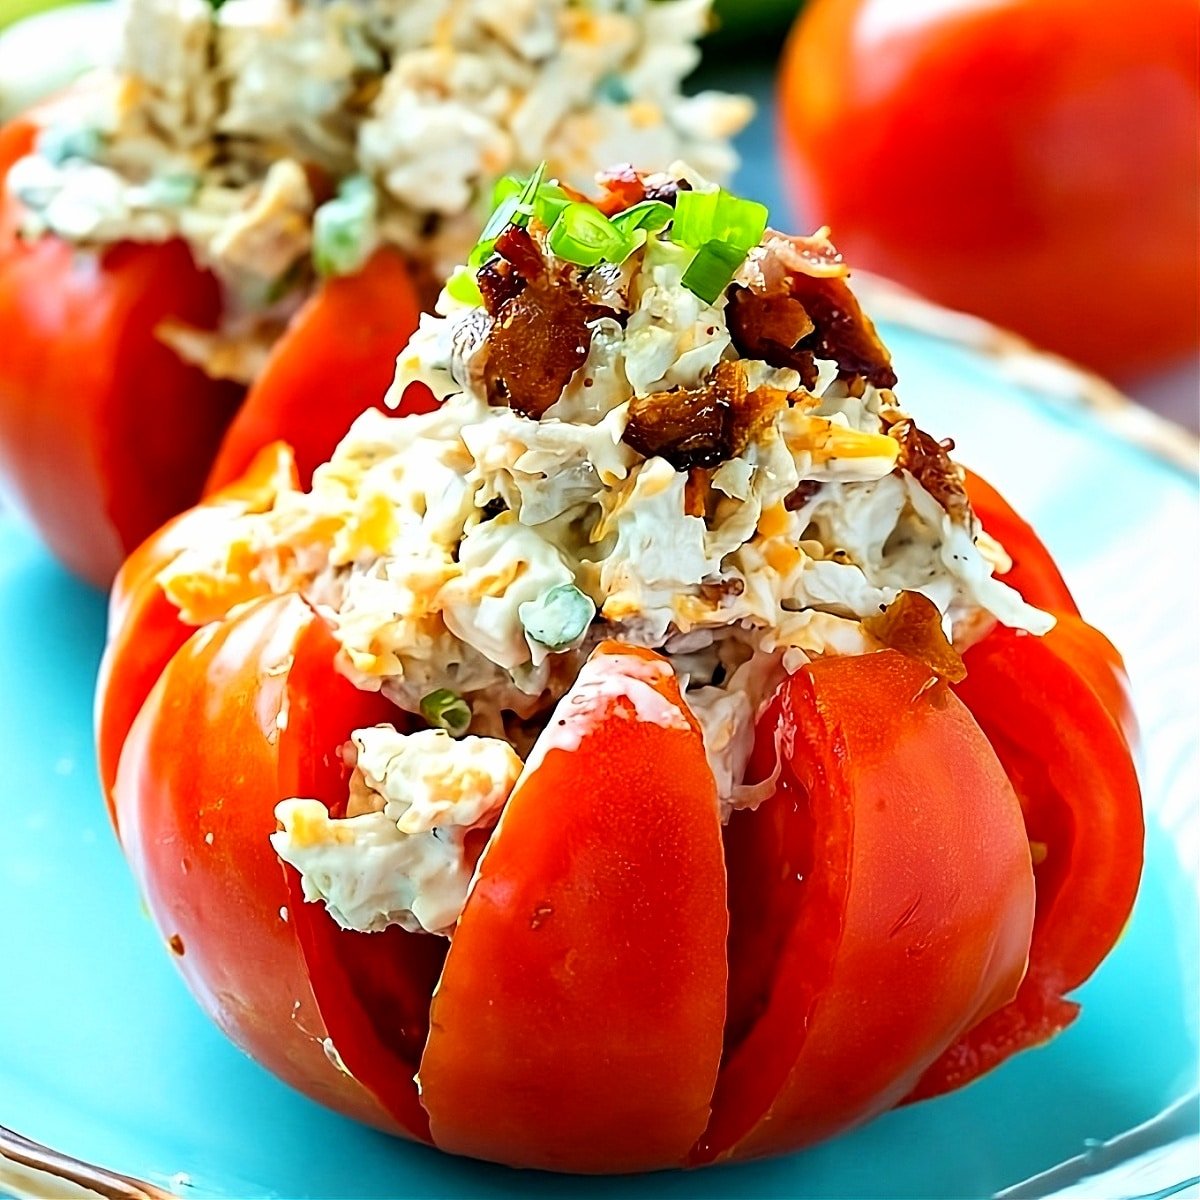 Chicken salad in a tomato.